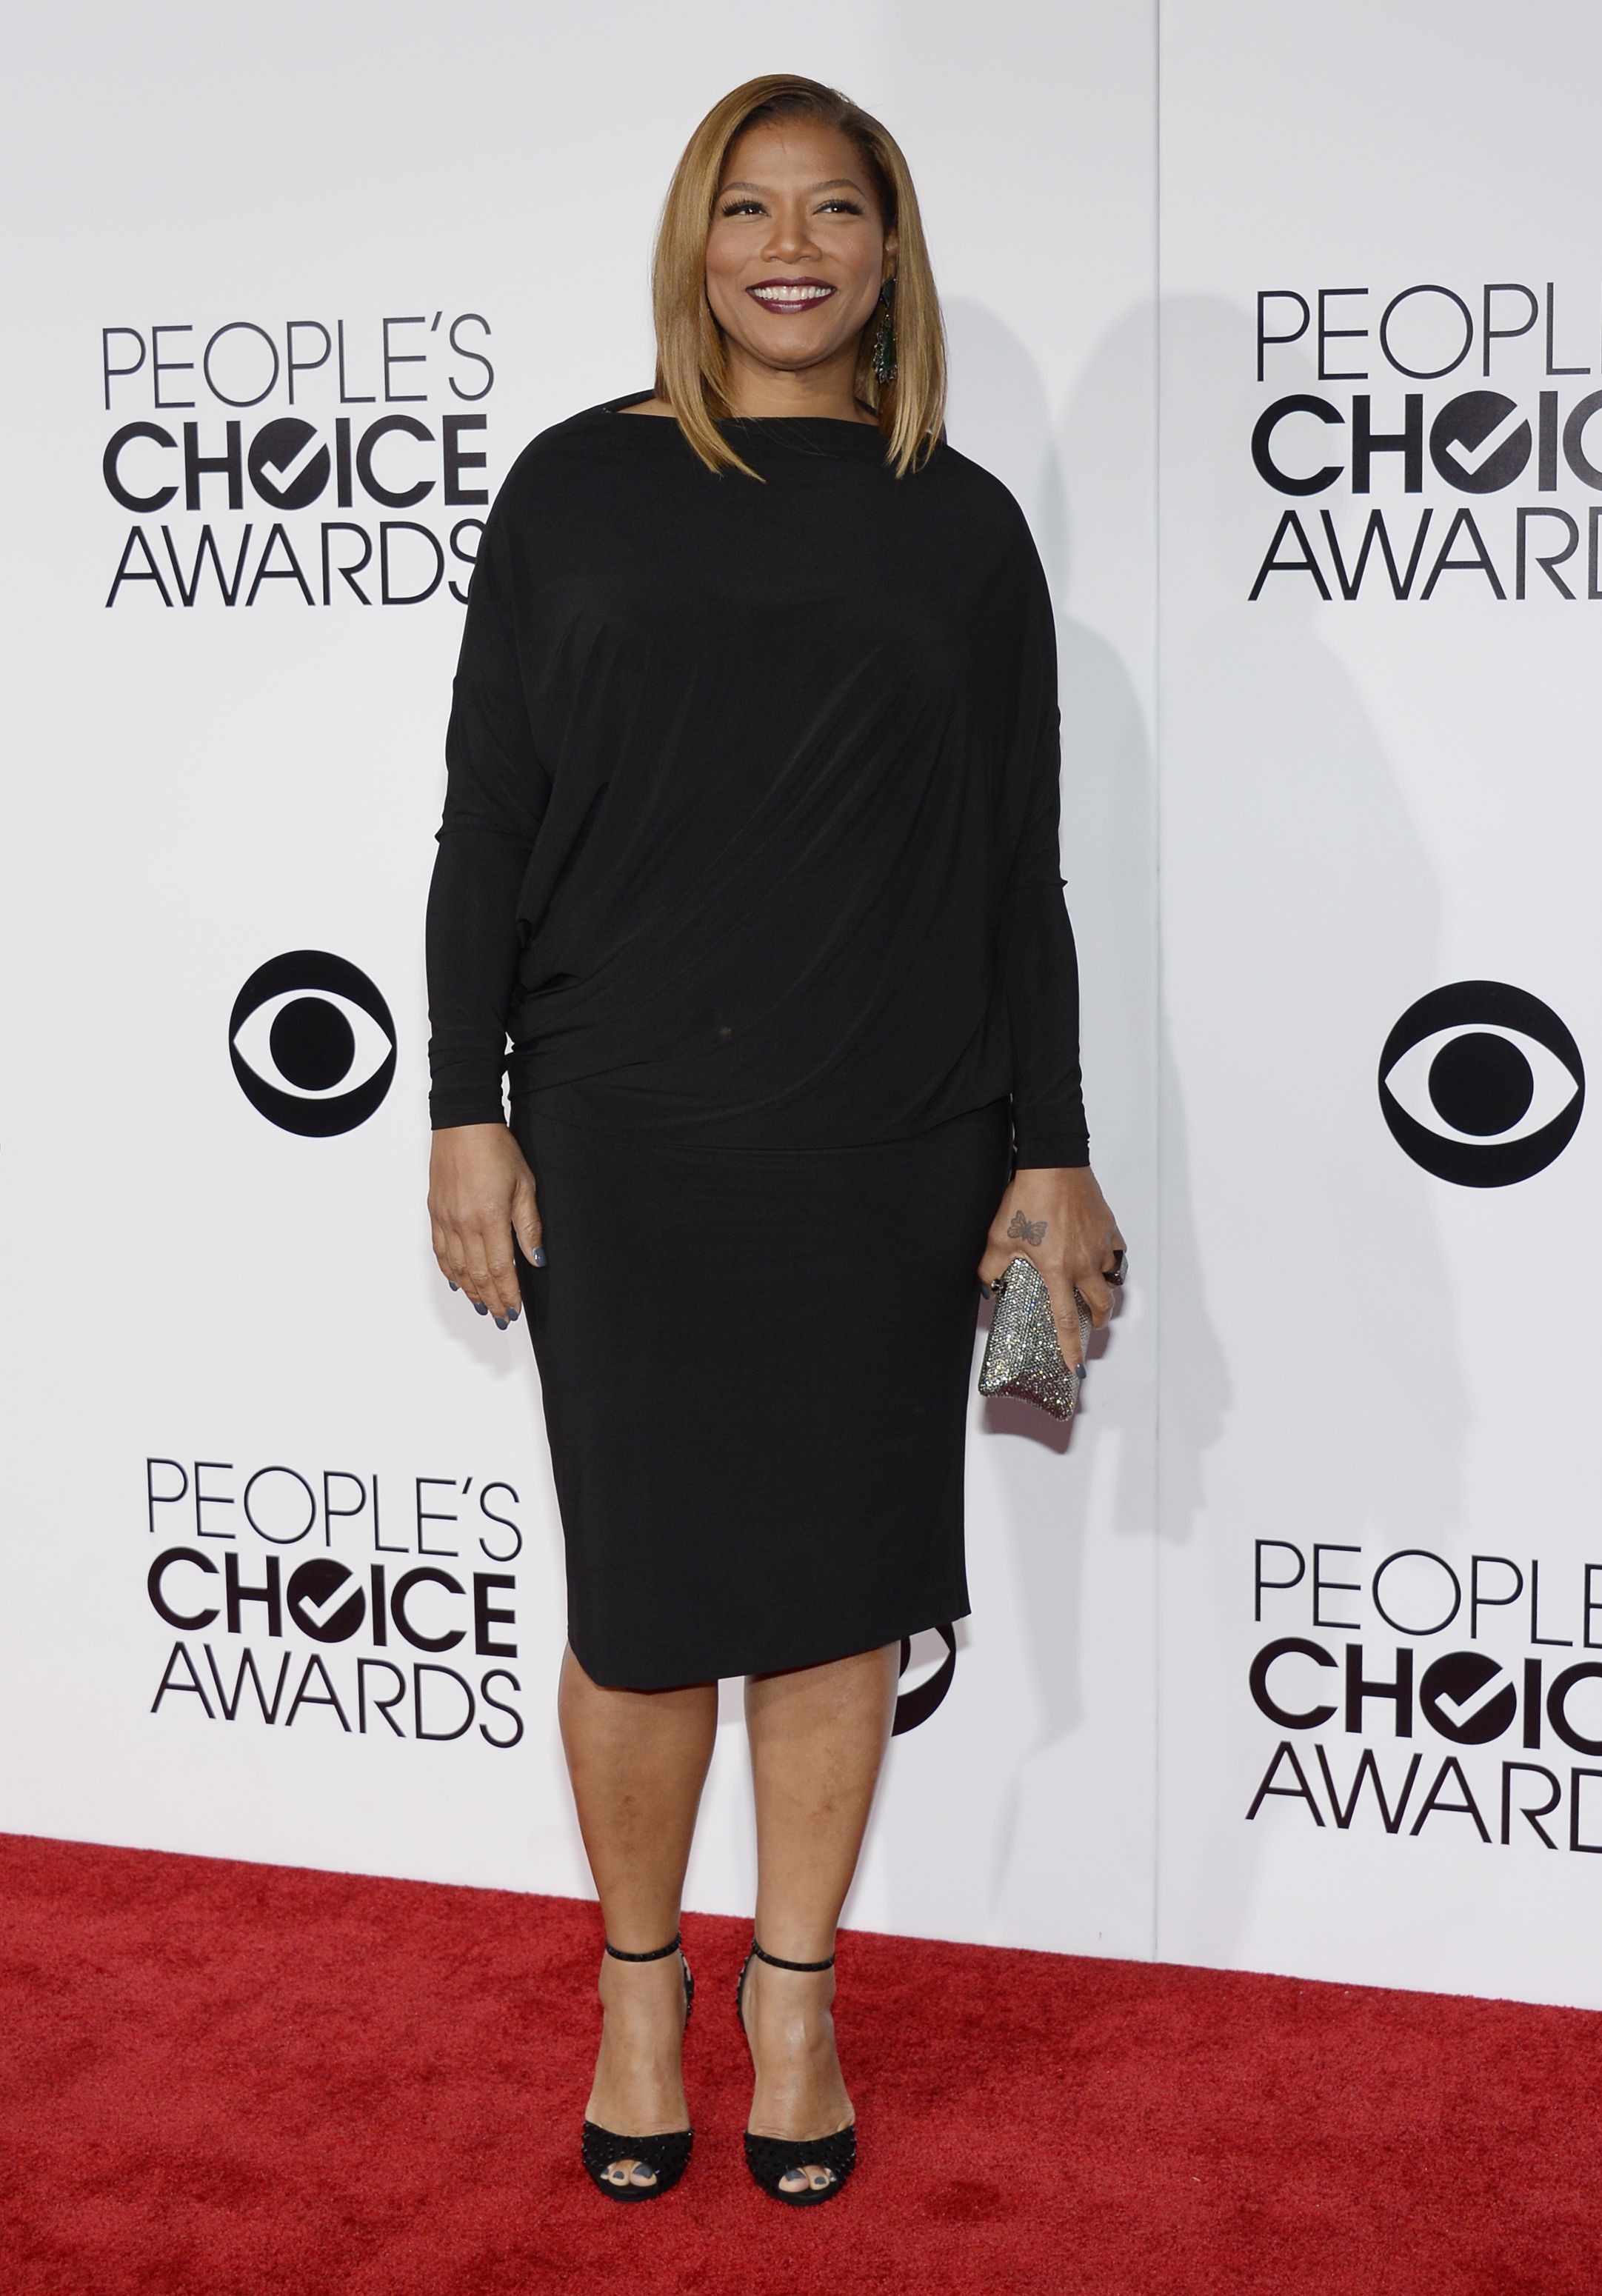 Peoples Choice Awards 2014 Best And Worst Dressed On The Red Carpet